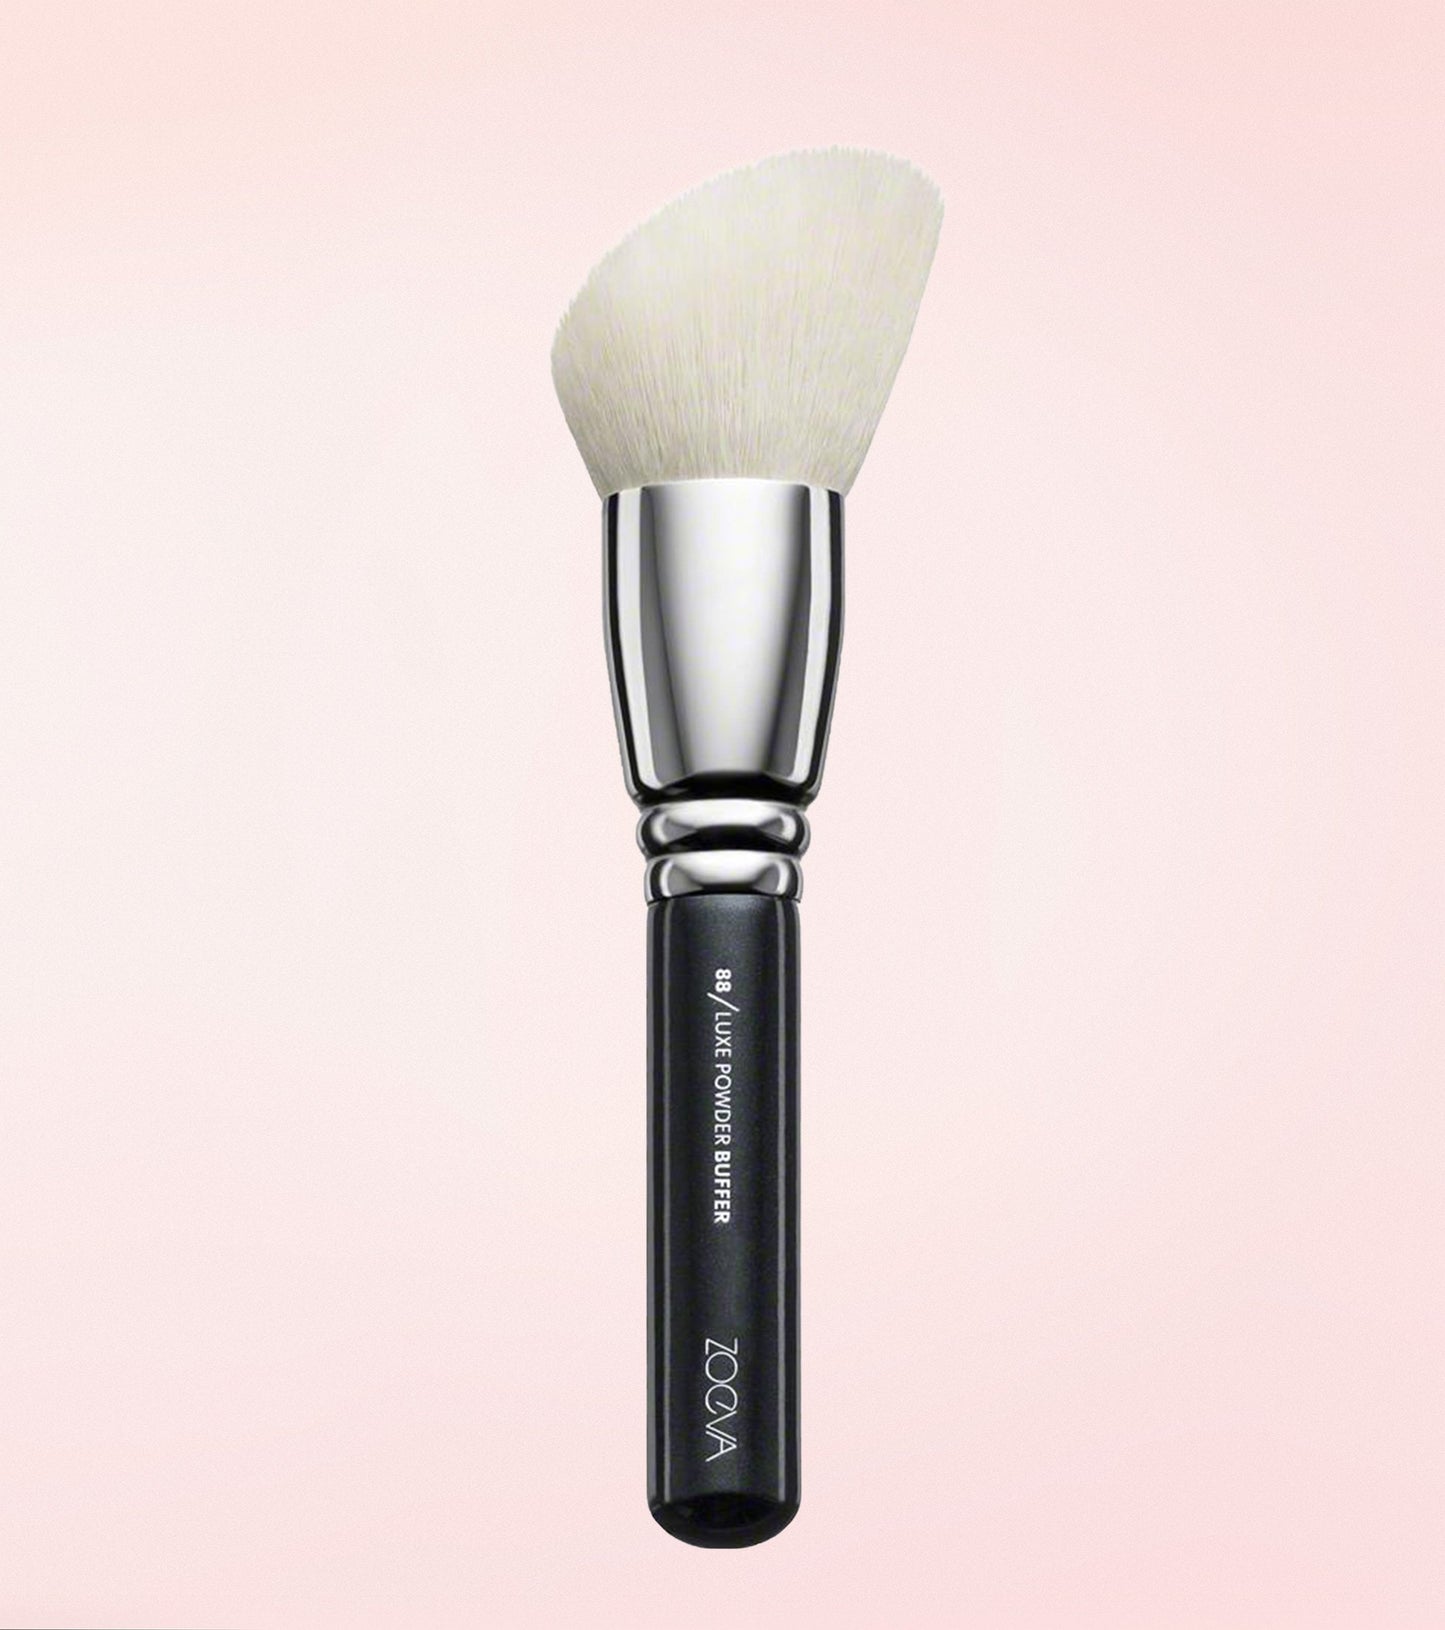 088 Luxe Powder Buffer Brush Expanded Image 1